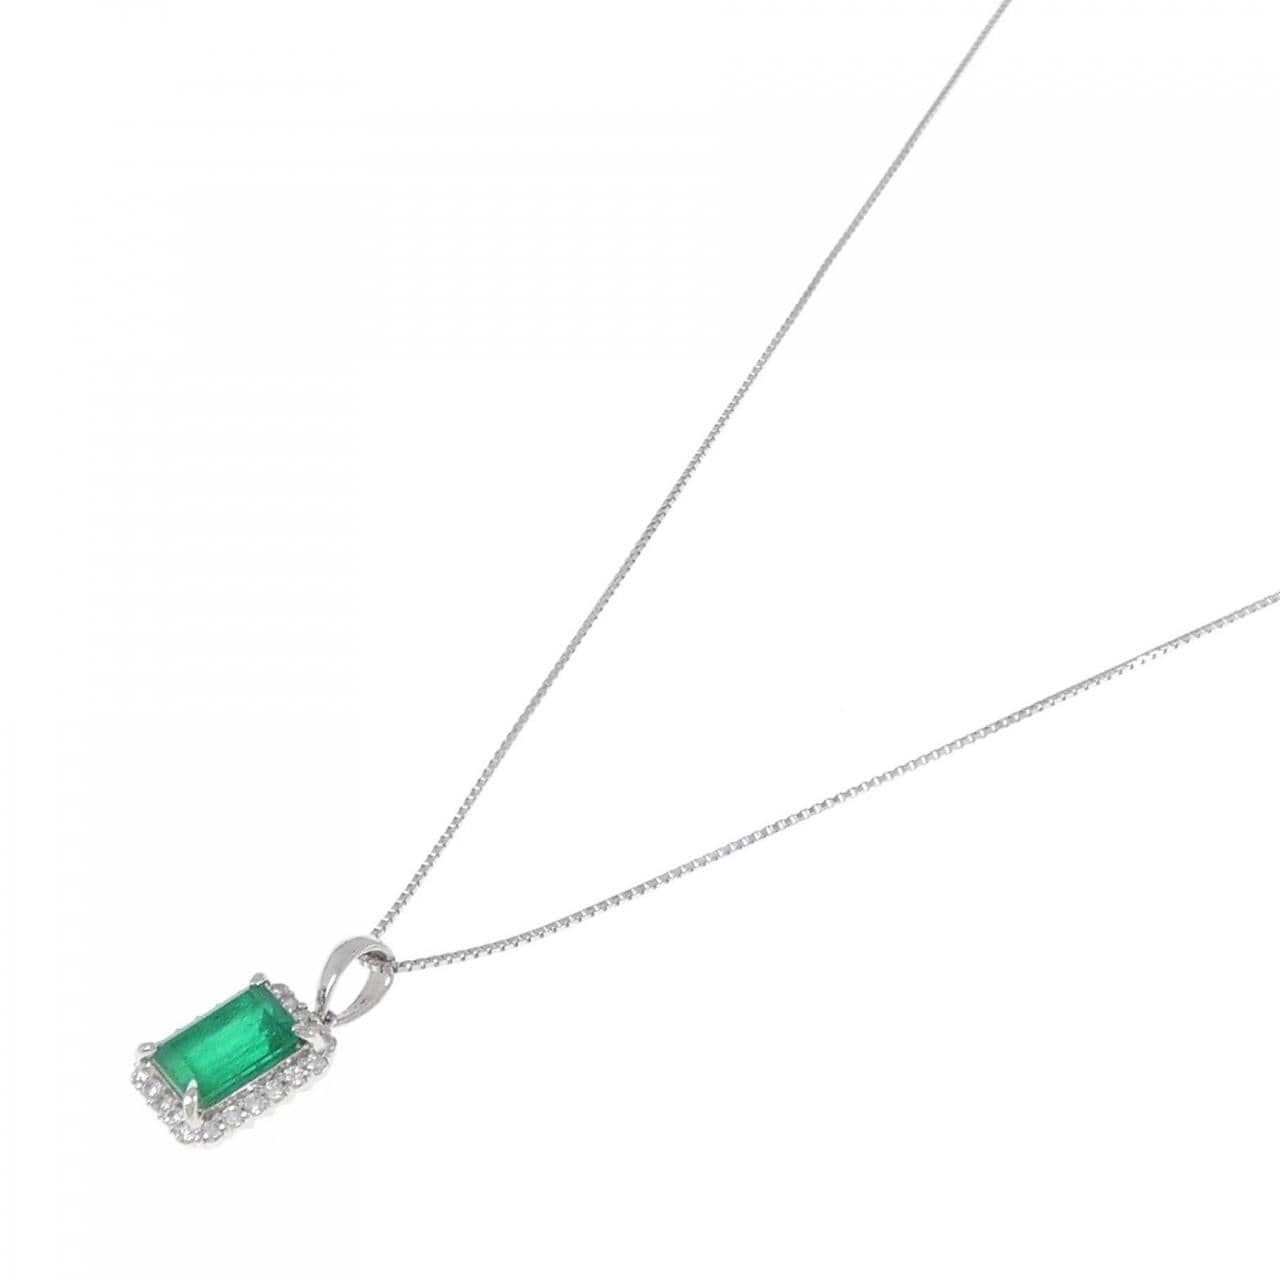 [Remake] PT Emerald Necklace 2.22CT Made in Colombia